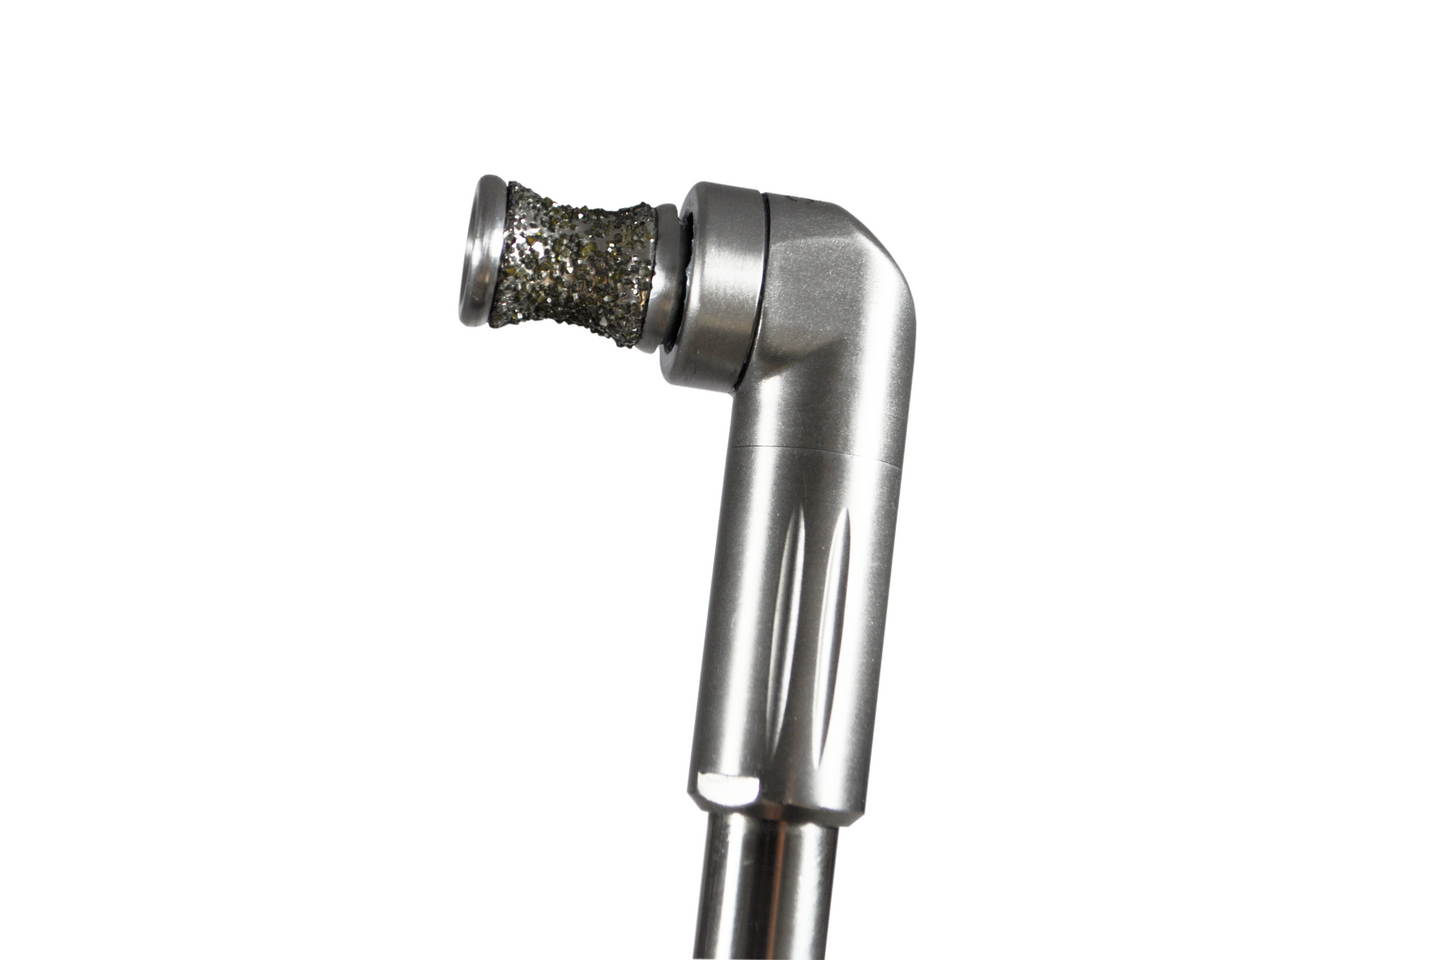 Compact Polyfloat Straight (without burr) - Stainless Steel or Polymer handle